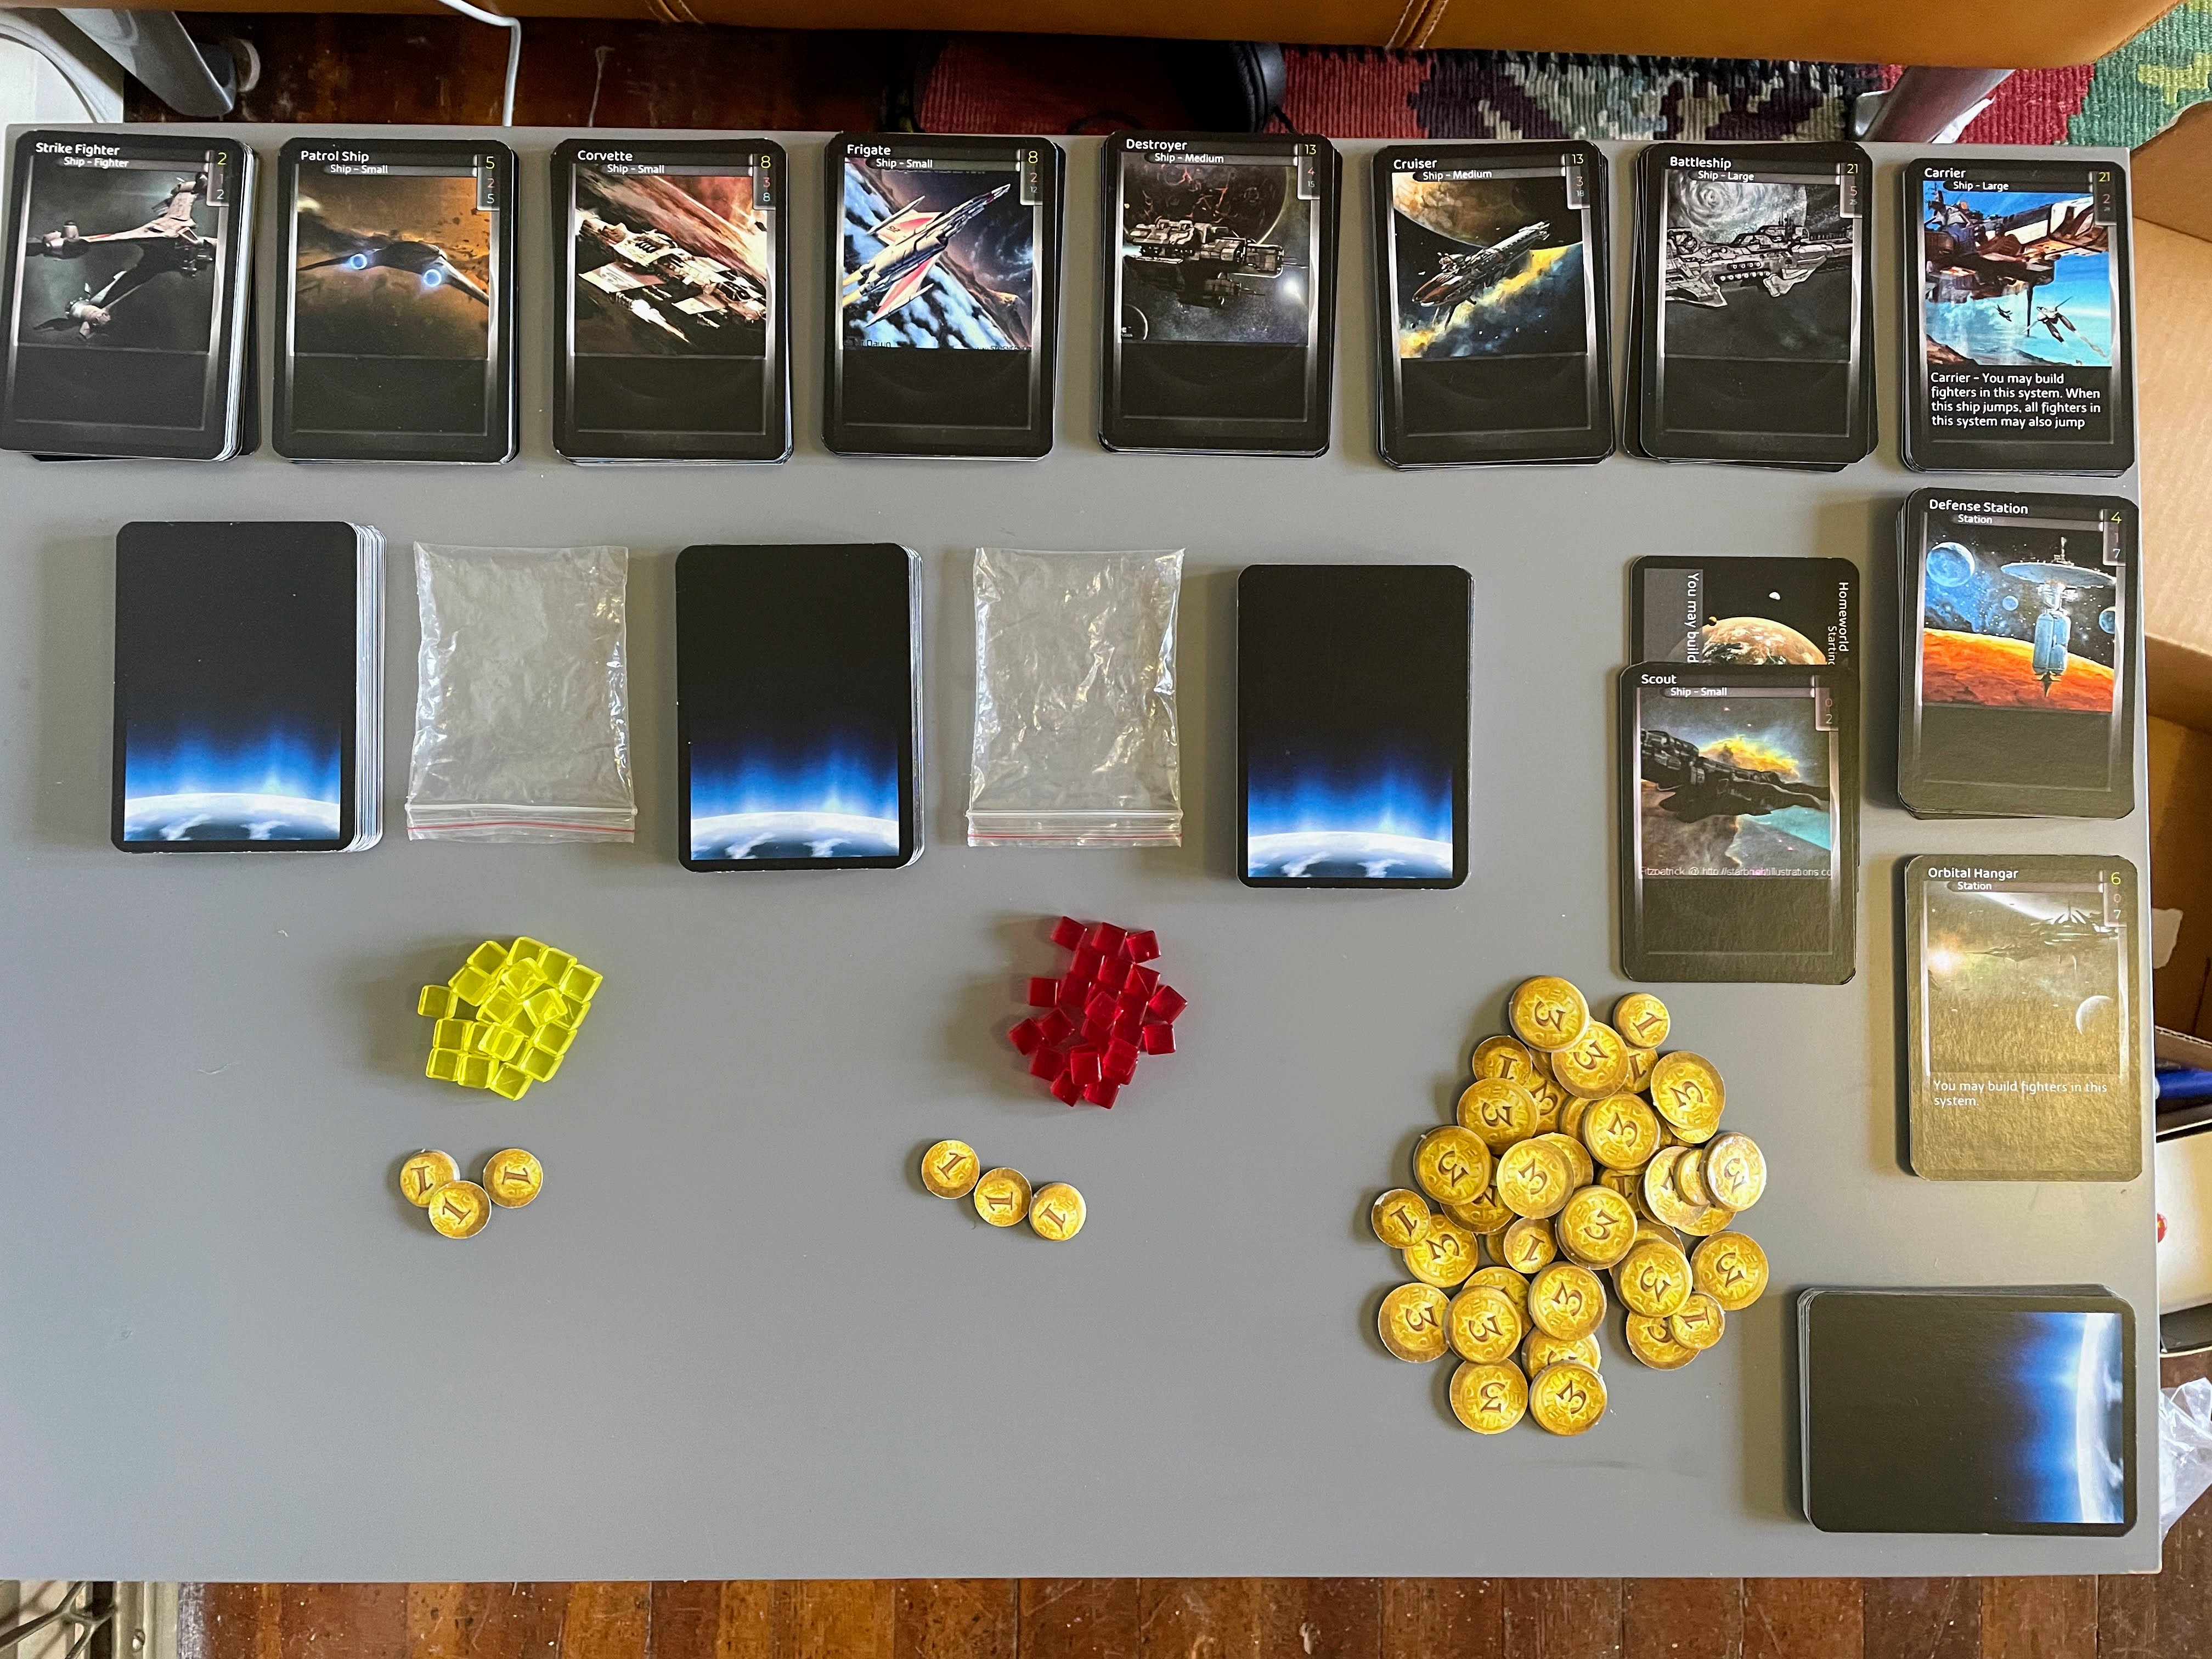 Stacks of cards are laid out on a table. Cards for ships are face up, with three decks set out face down. Tokens for developments and credits are also spread out.